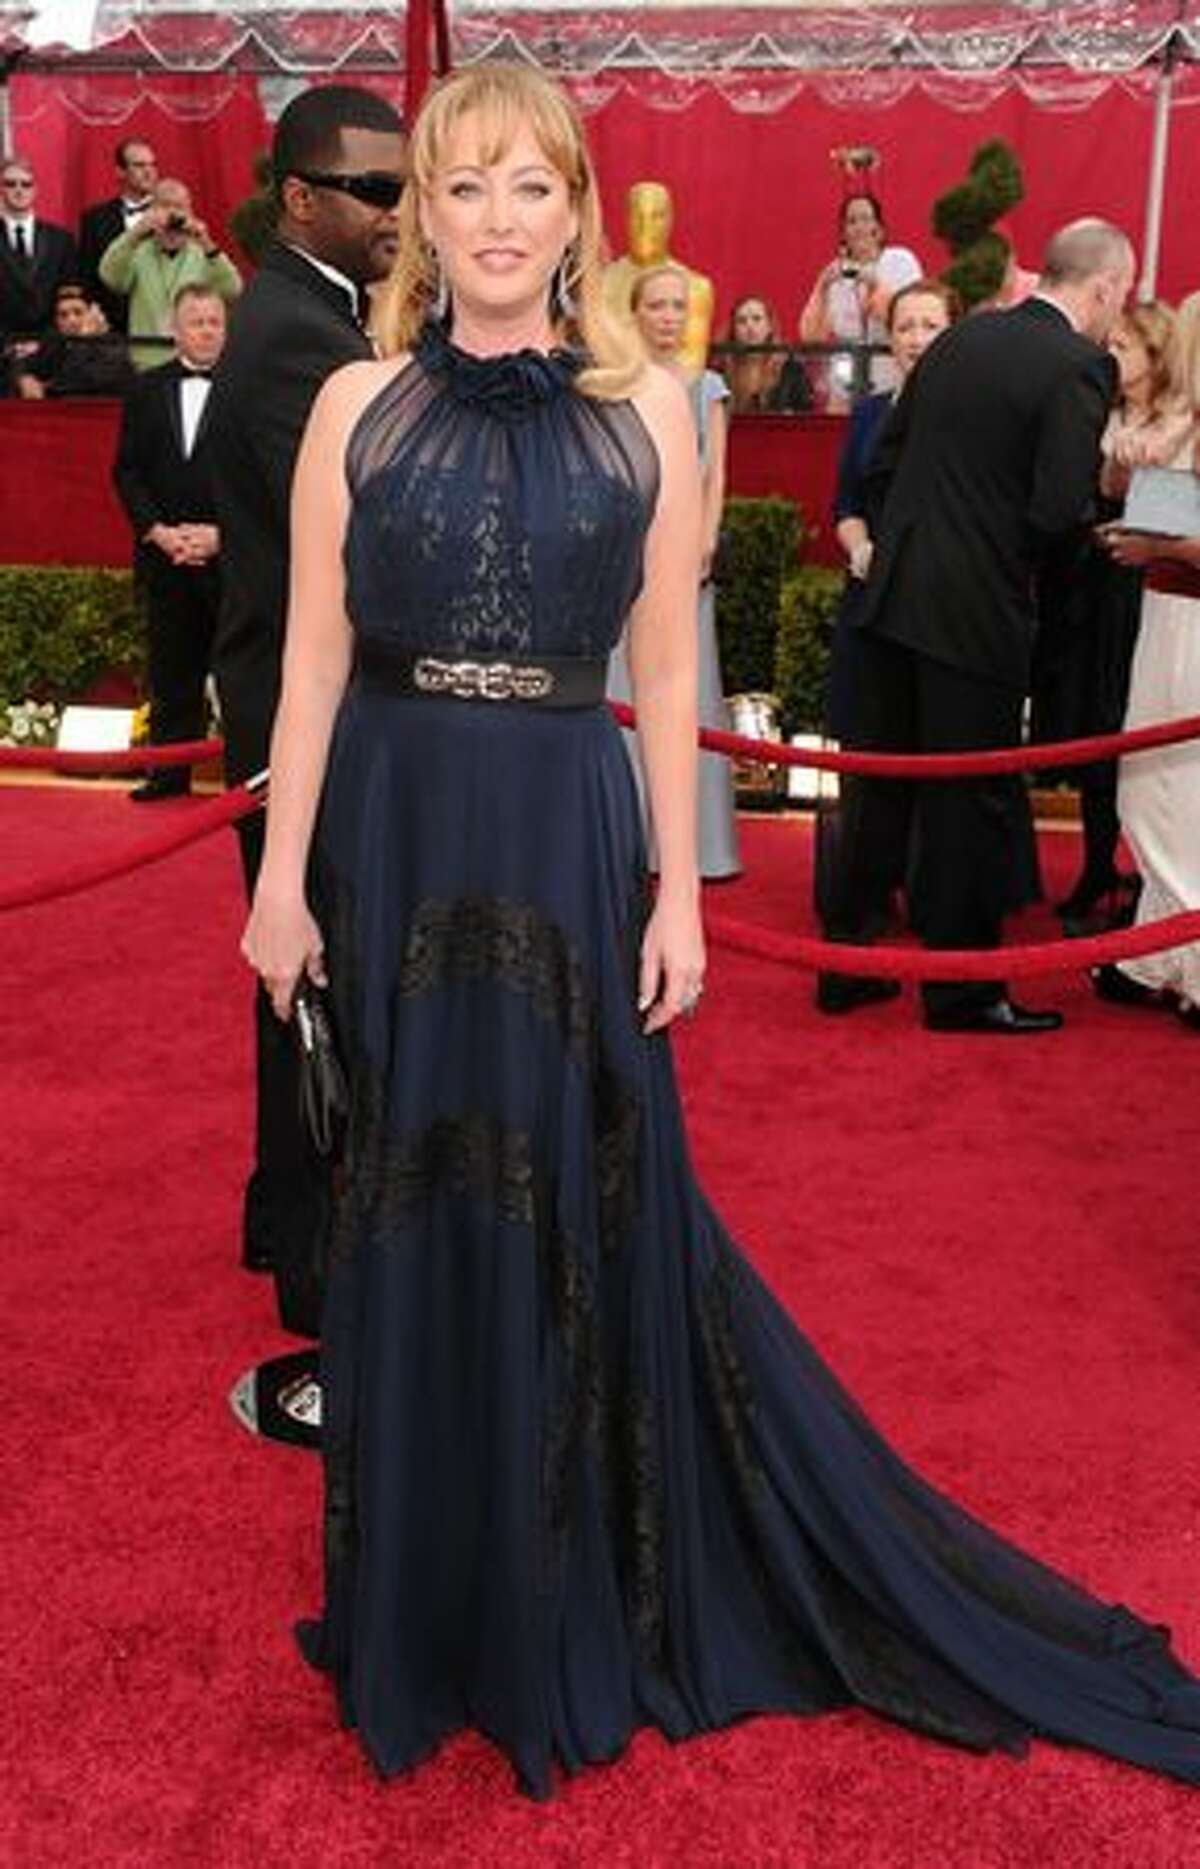 Actress Virginia Madsen arrives at the 82nd Annual Academy Awards held at Kodak Theatre in Hollywood, California.